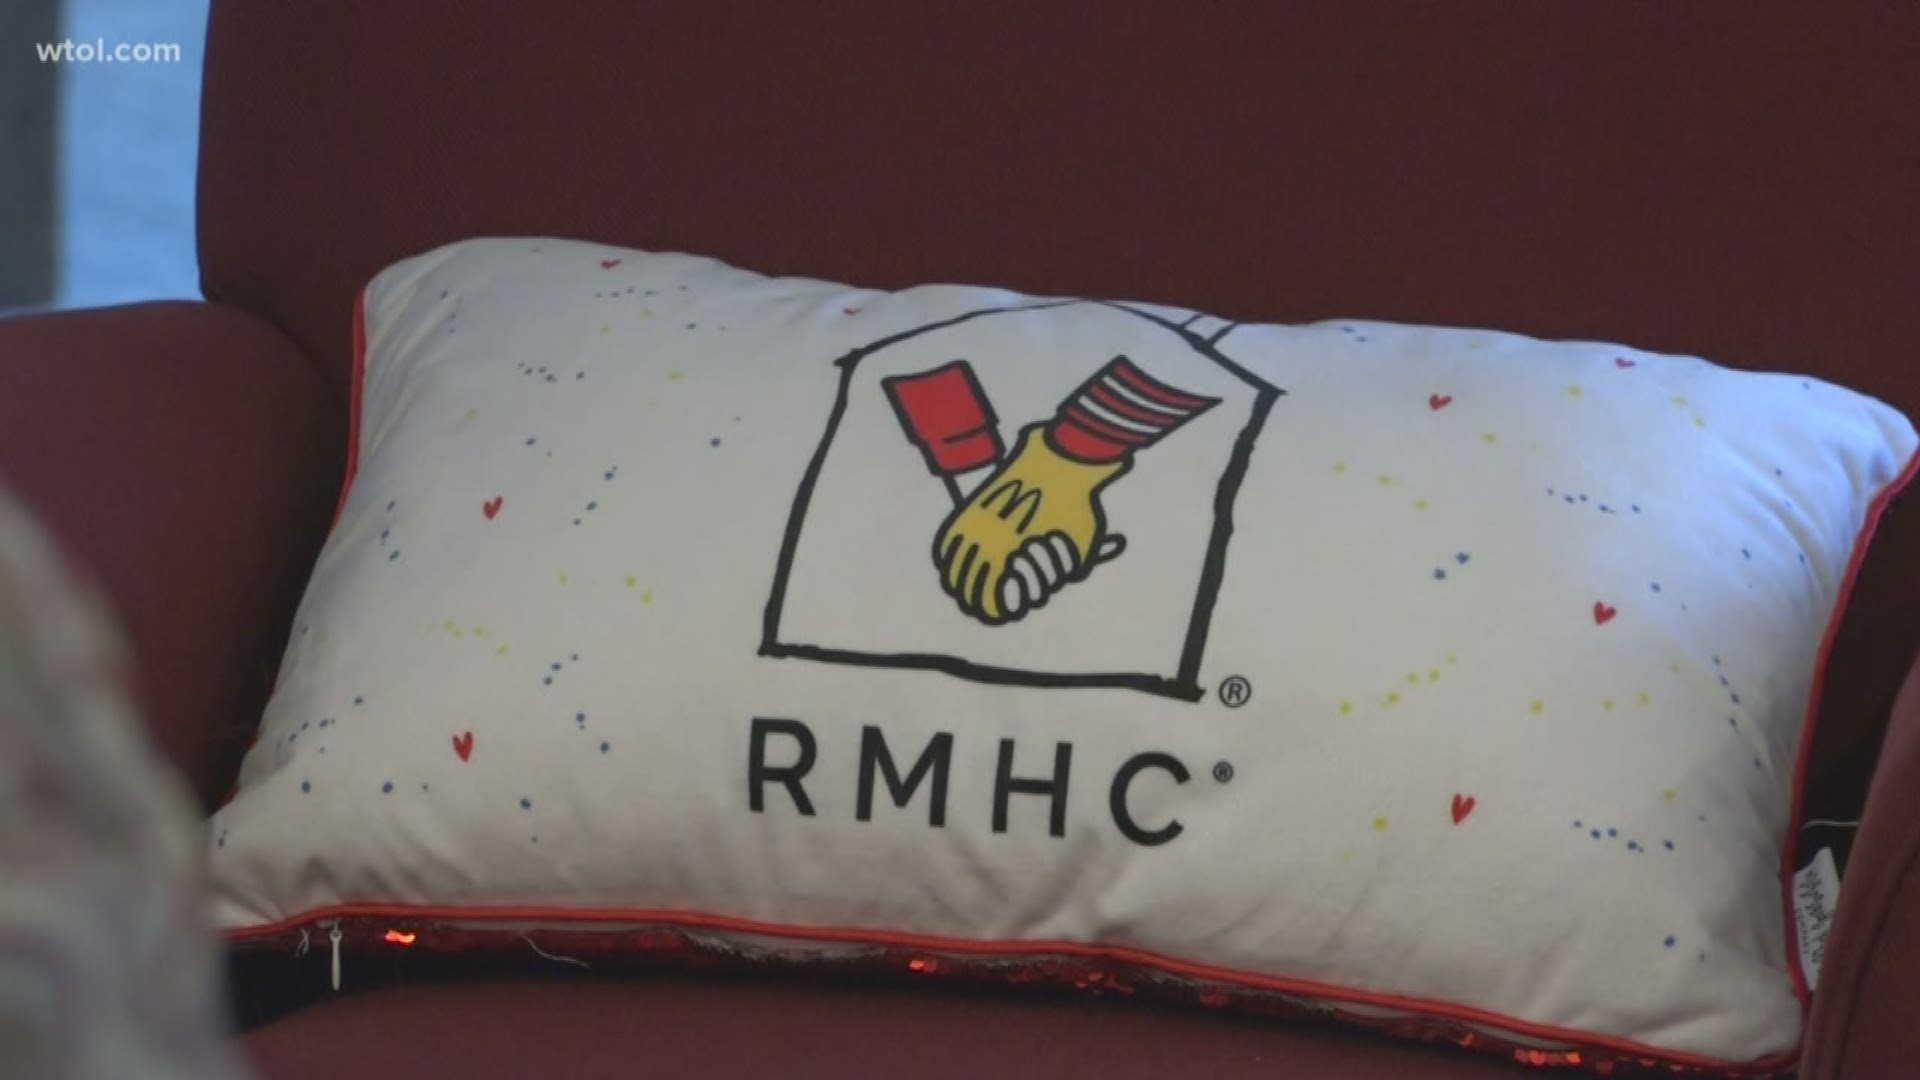 Each year, the Ronald McDonald House Charities of Northwest Ohio serves an average of 650 families. On Monday, they celebrated their service for the 37th time.